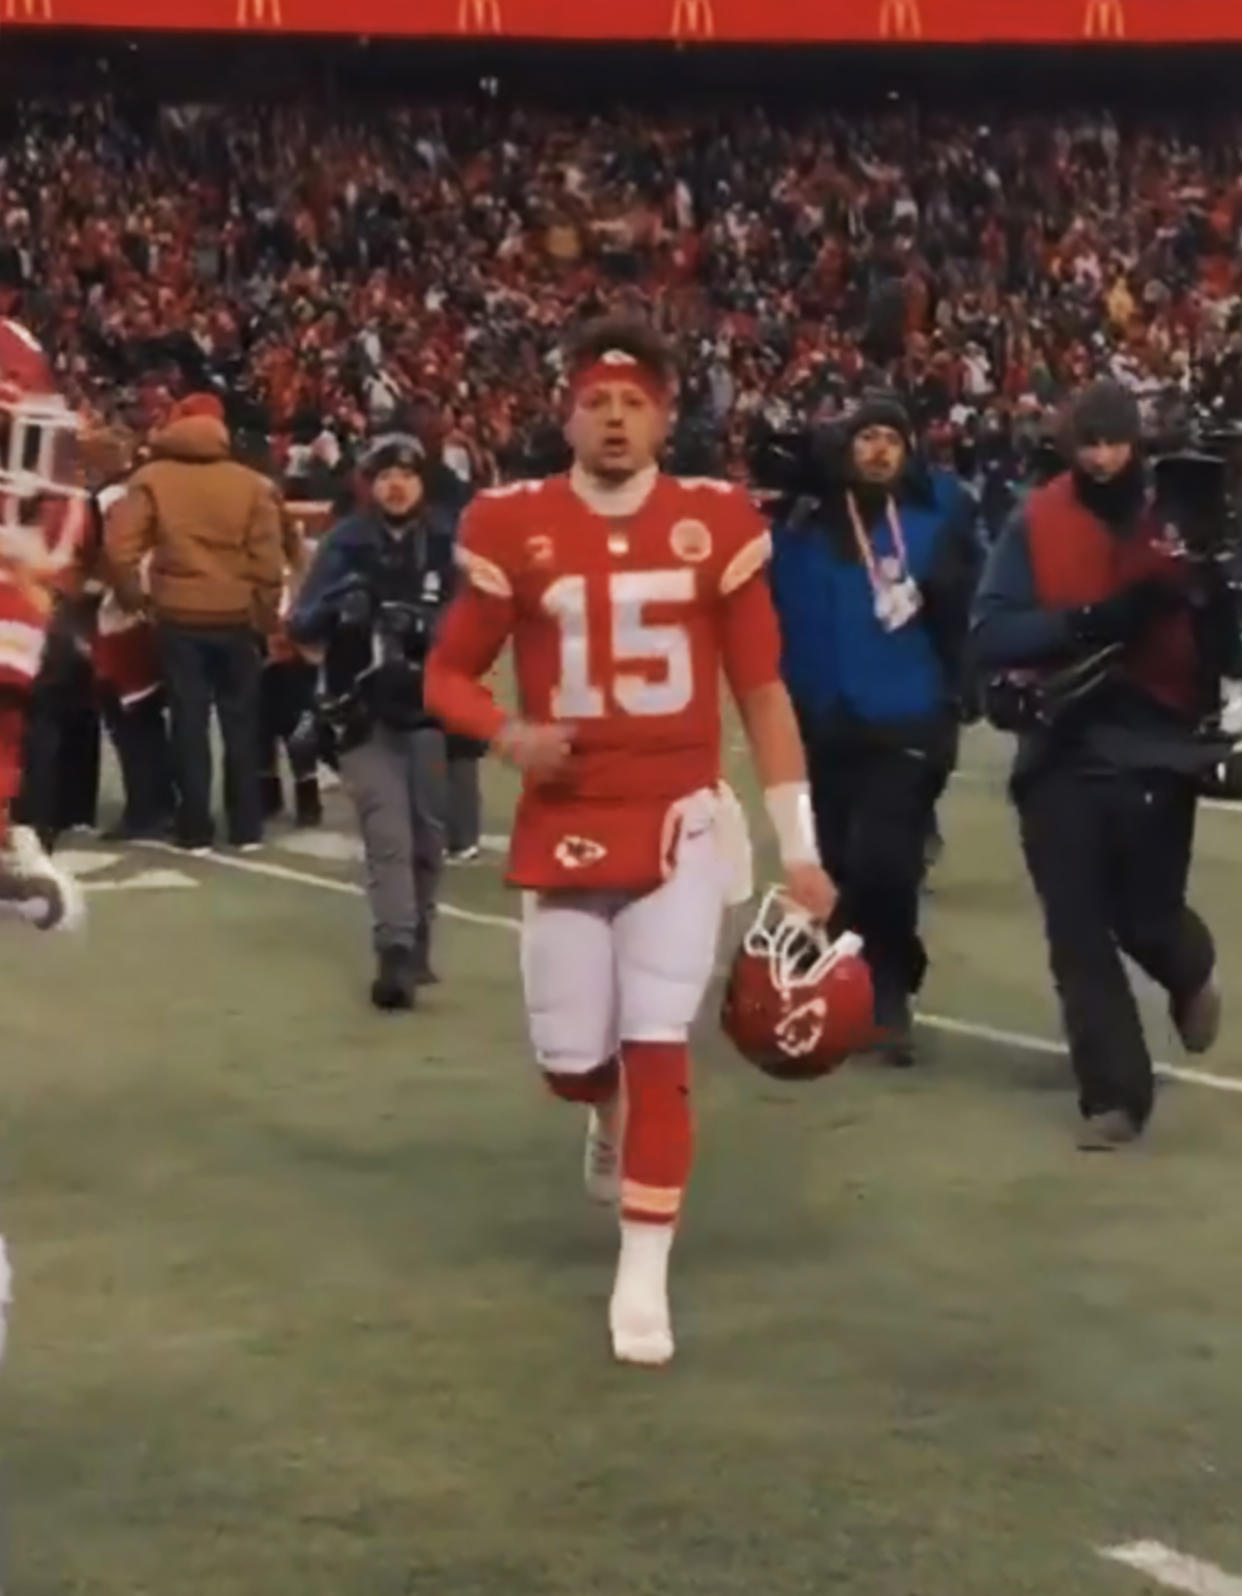 Brittany Mahomes shared a video of her husband, Kansas City Chiefs quarterback Patrick Mahomes, running off the field to greet her and their daughter, Sterling Skye. (@brittanylynne via Instagram)